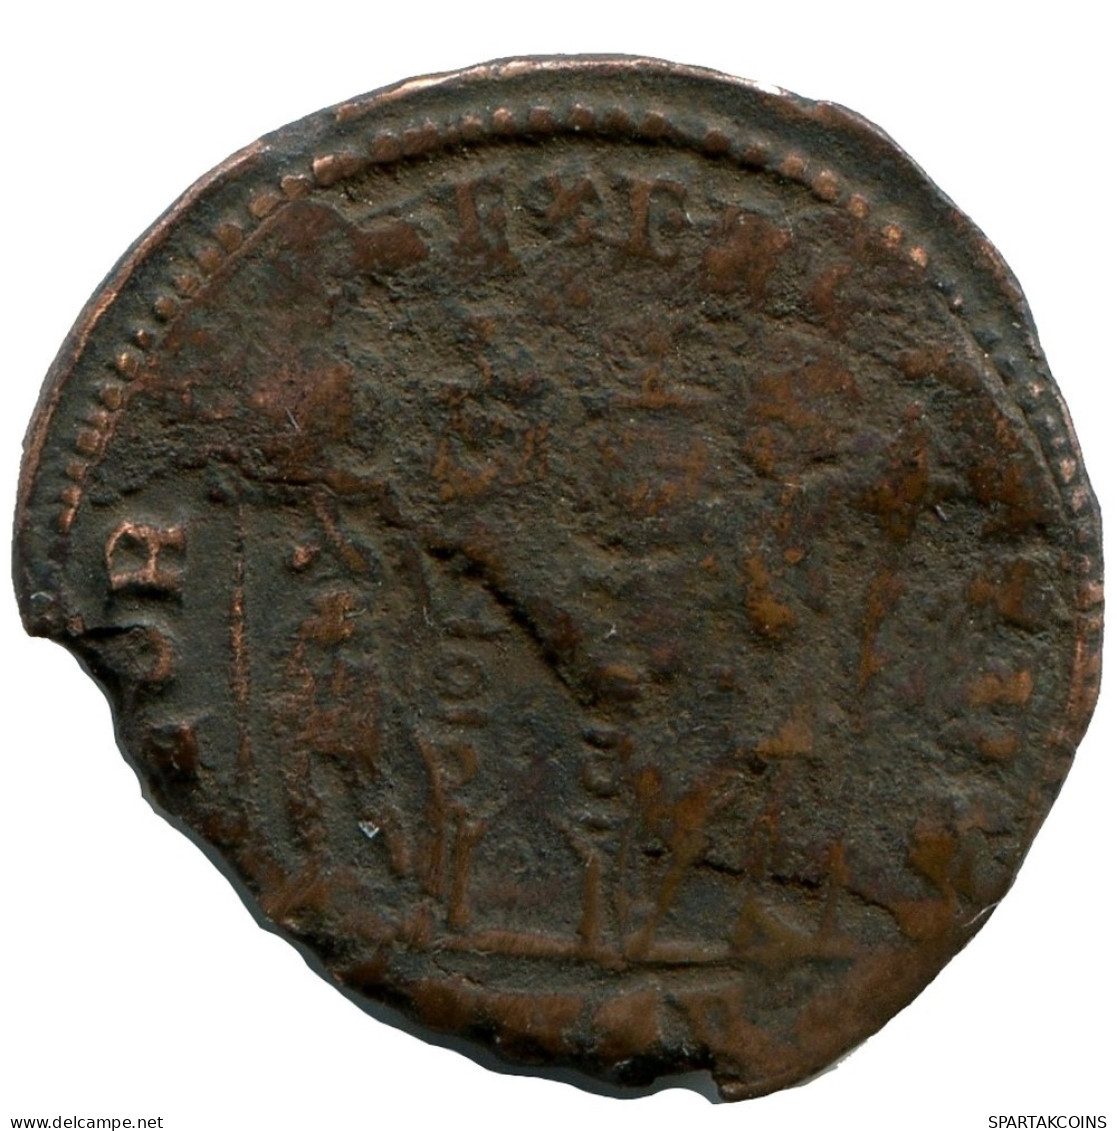 CONSTANTINE I CONSTANTINOPLE FROM THE ROYAL ONTARIO MUSEUM #ANC10765.14.E.A - The Christian Empire (307 AD Tot 363 AD)